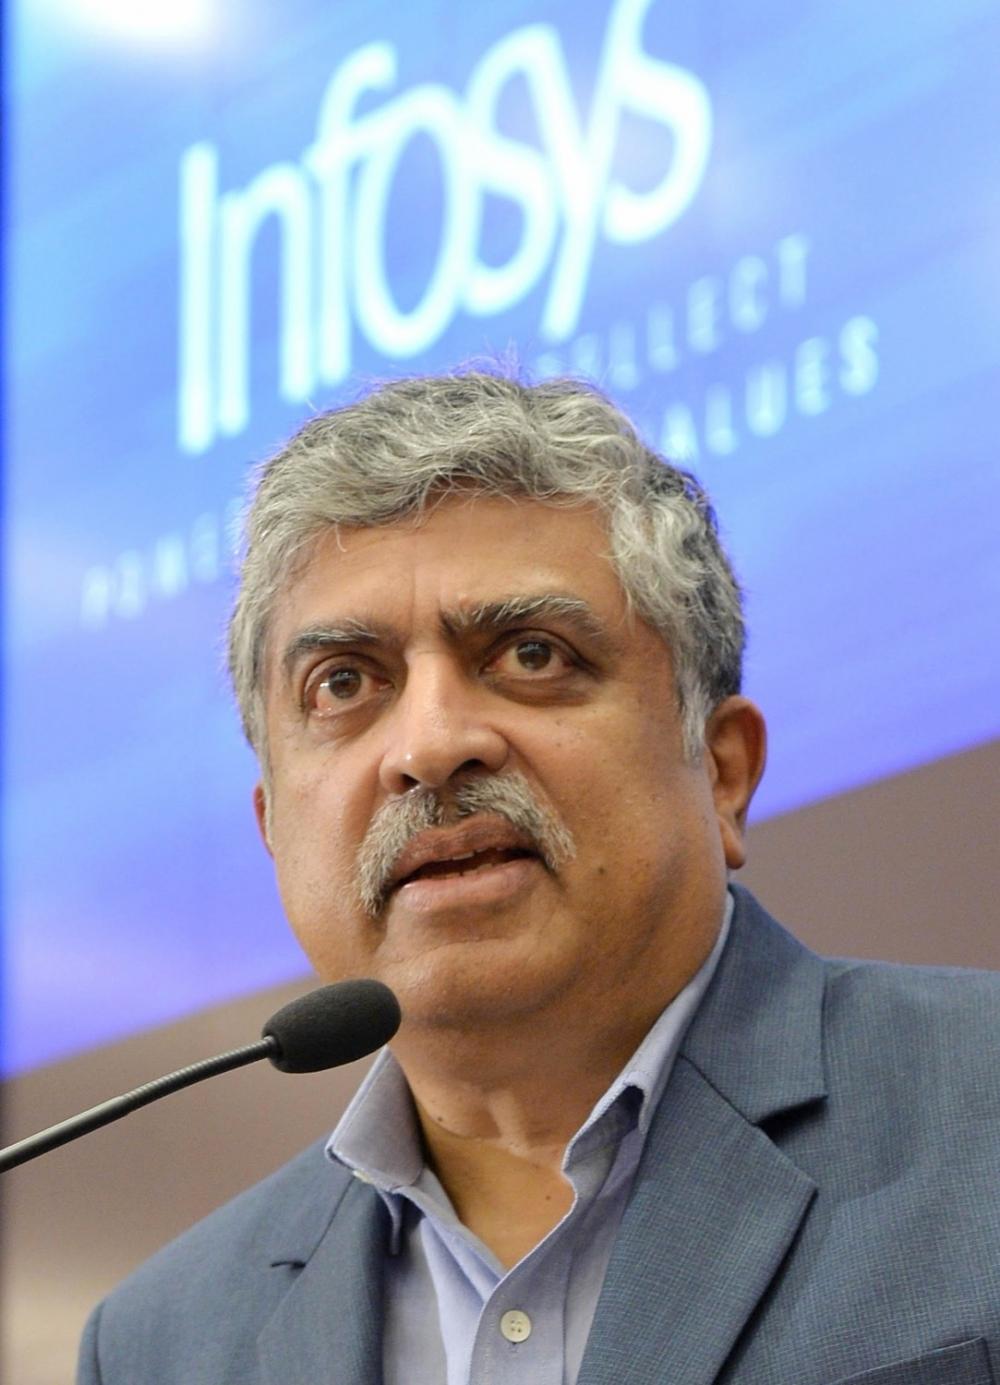 The Weekend Leader - ﻿Infosys regrets glitches on ITR e-filing portal, working on resolution: Nilekani